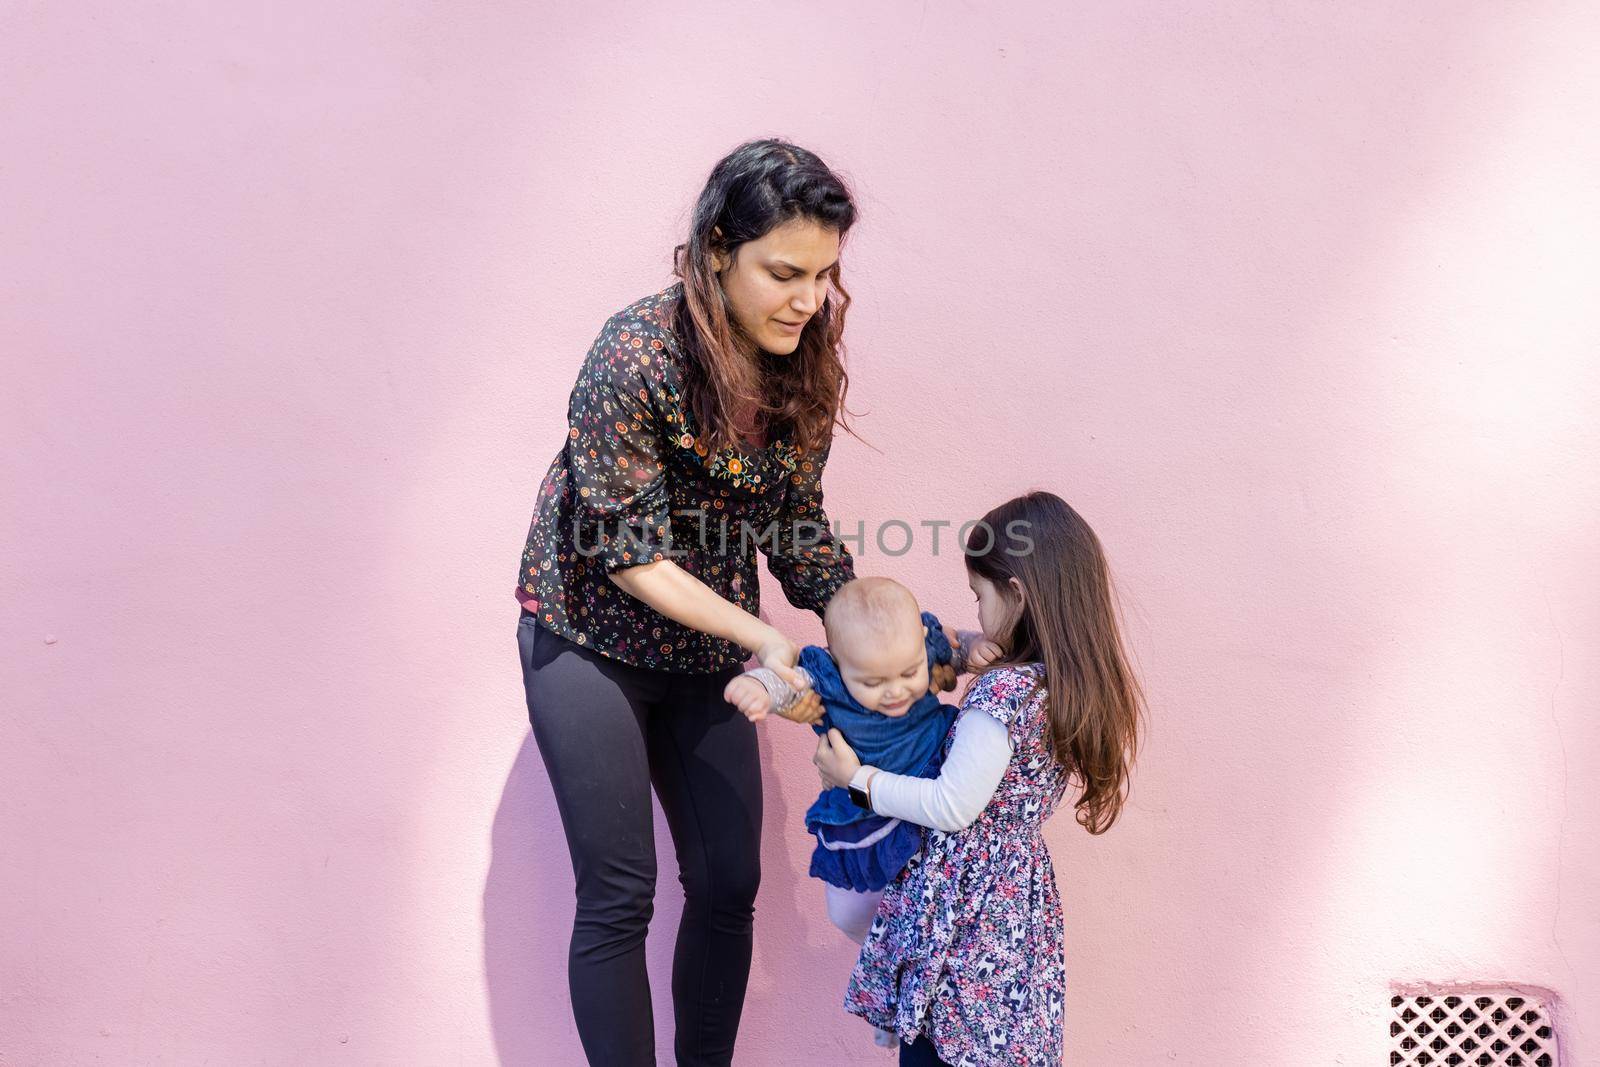 Portrait of woman helping little girl to hold cute smiling baby with pink wall as background. Adorable view of baby in arms of her older sister and mother. Happy family outdoors